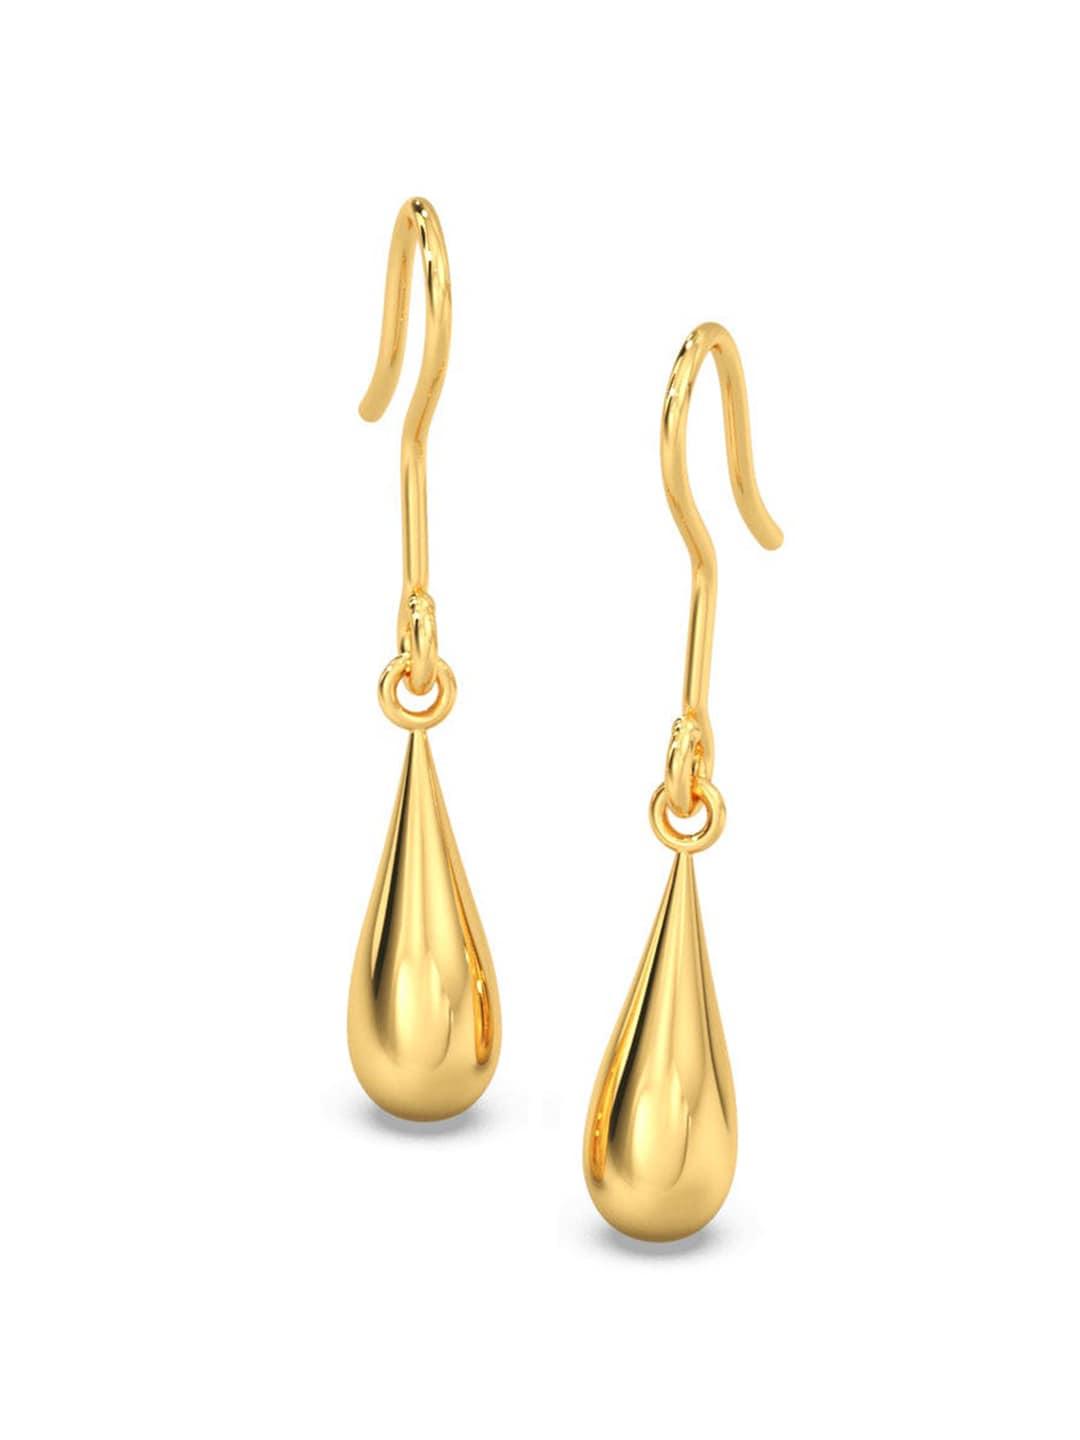 candere a kalyan jewellers company 18kt gold bis hallmark earrings-2.2gm